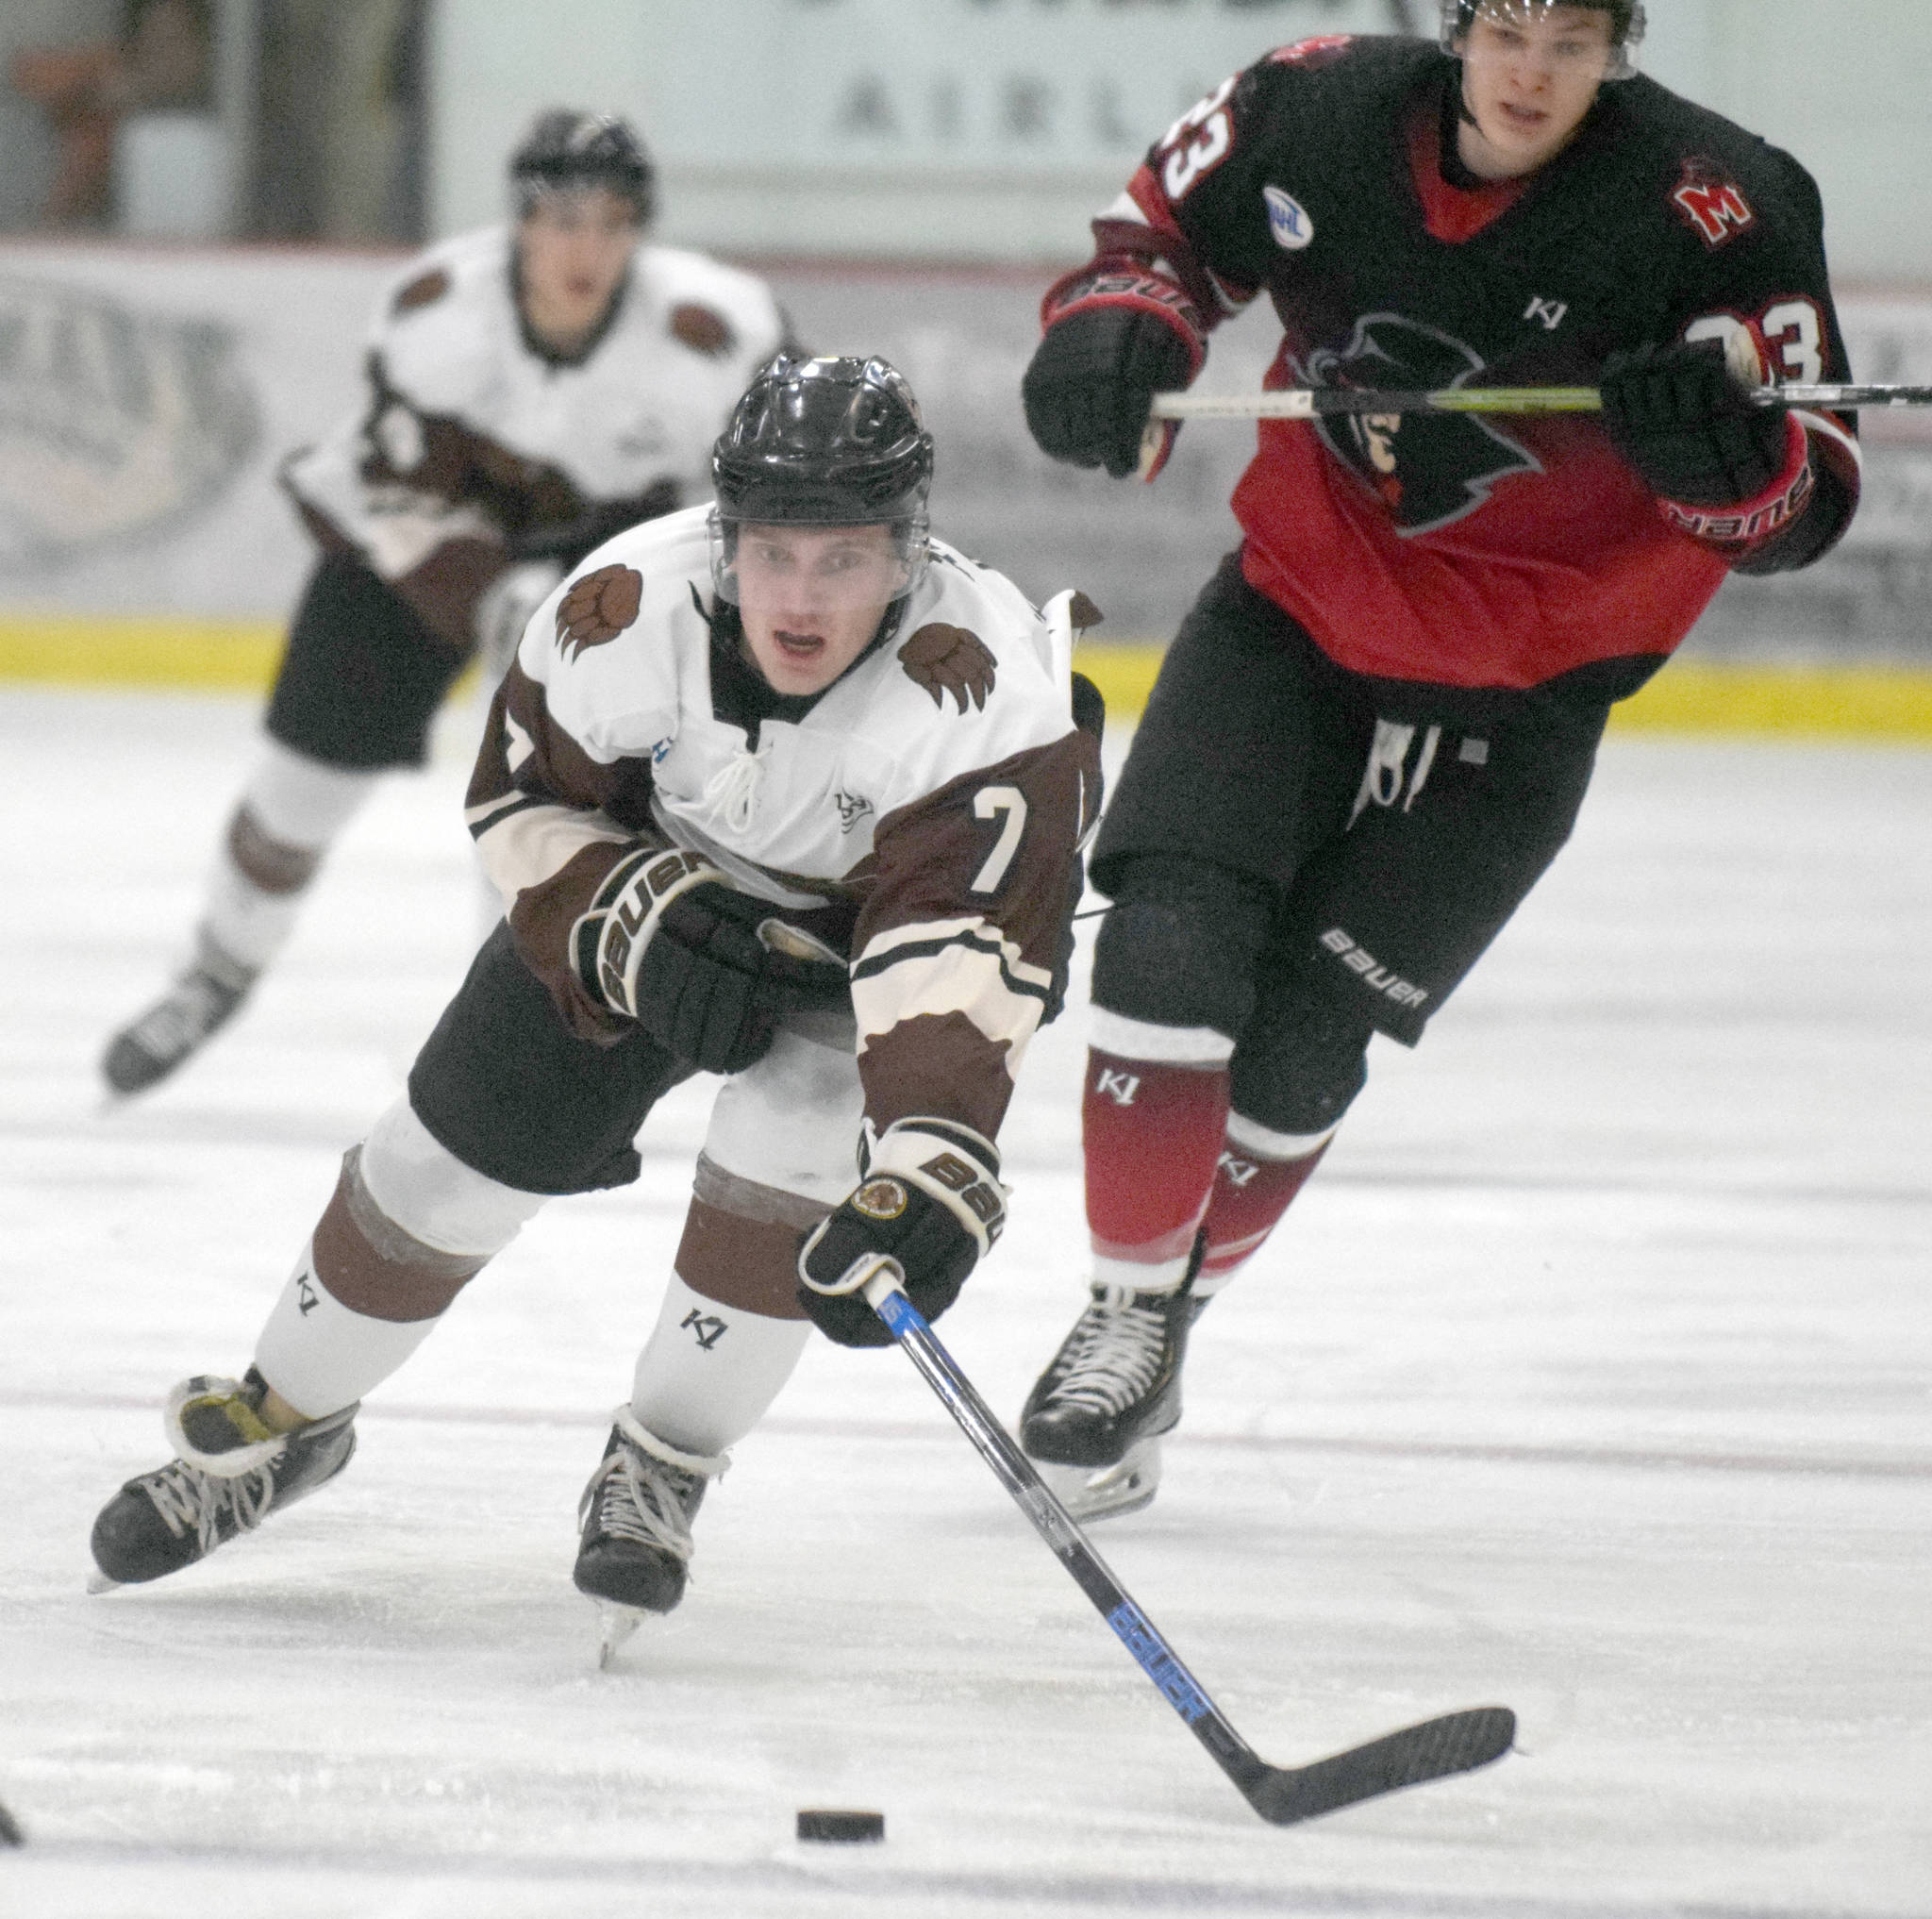 Kenai River Brown Bears forward Logan Ritchie reaches for the puck against the Minnesota Magicians on Friday, Oct. 18, 2019, at the Soldotna Regional Sports Complex in Soldotna, Alaska. (Photo by Jeff Helminiak/Peninsula Clarion)